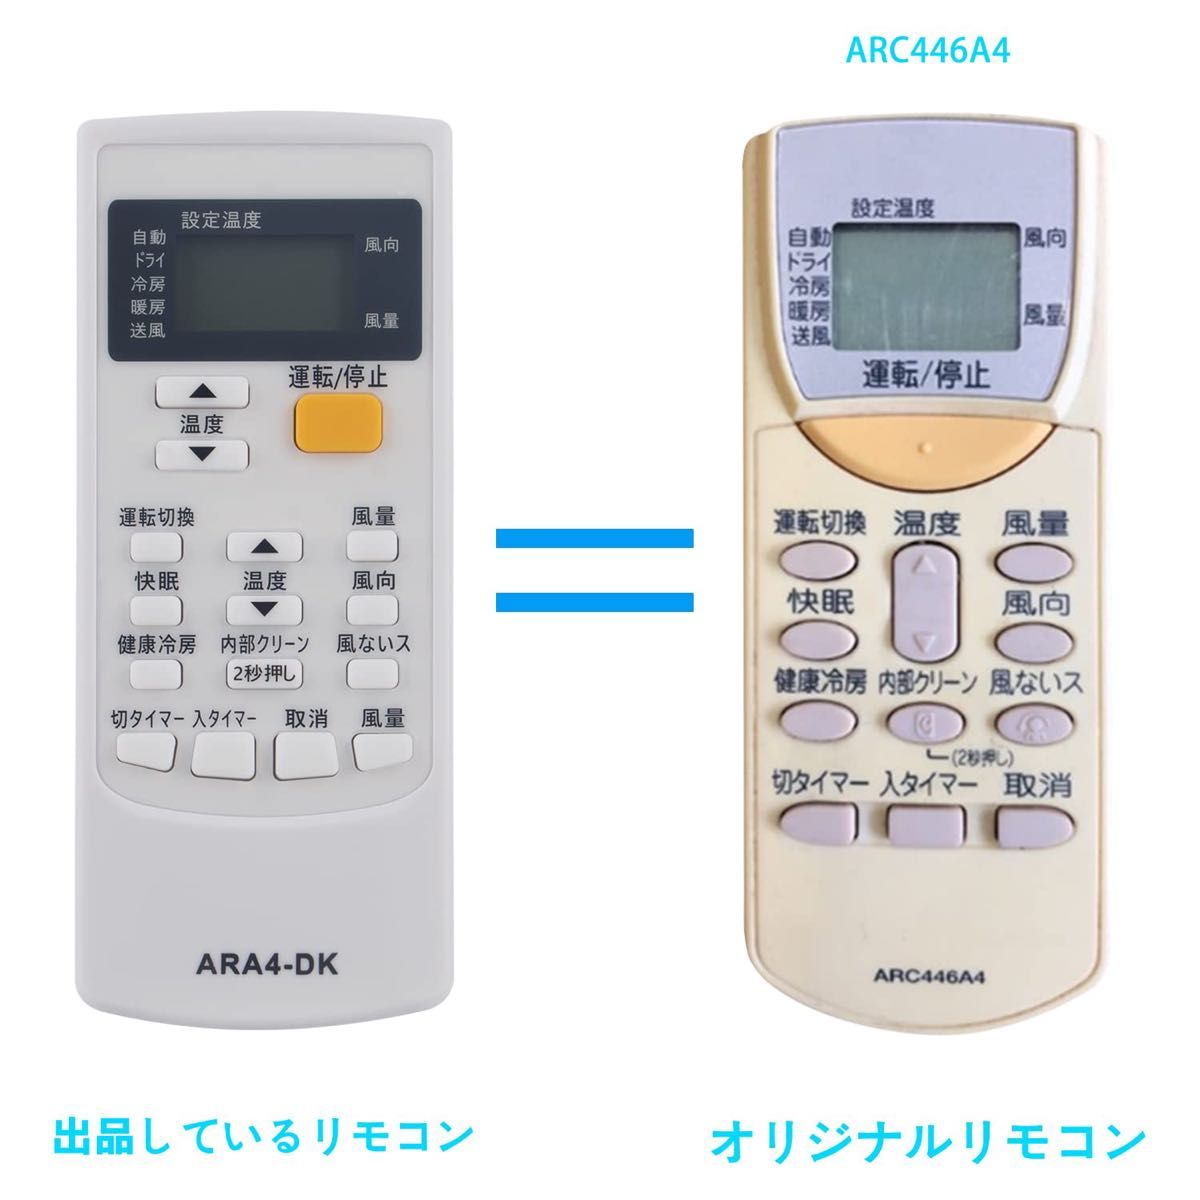 AULCMEETエアコン用リモコン fit for ダイキン ARC446A4 